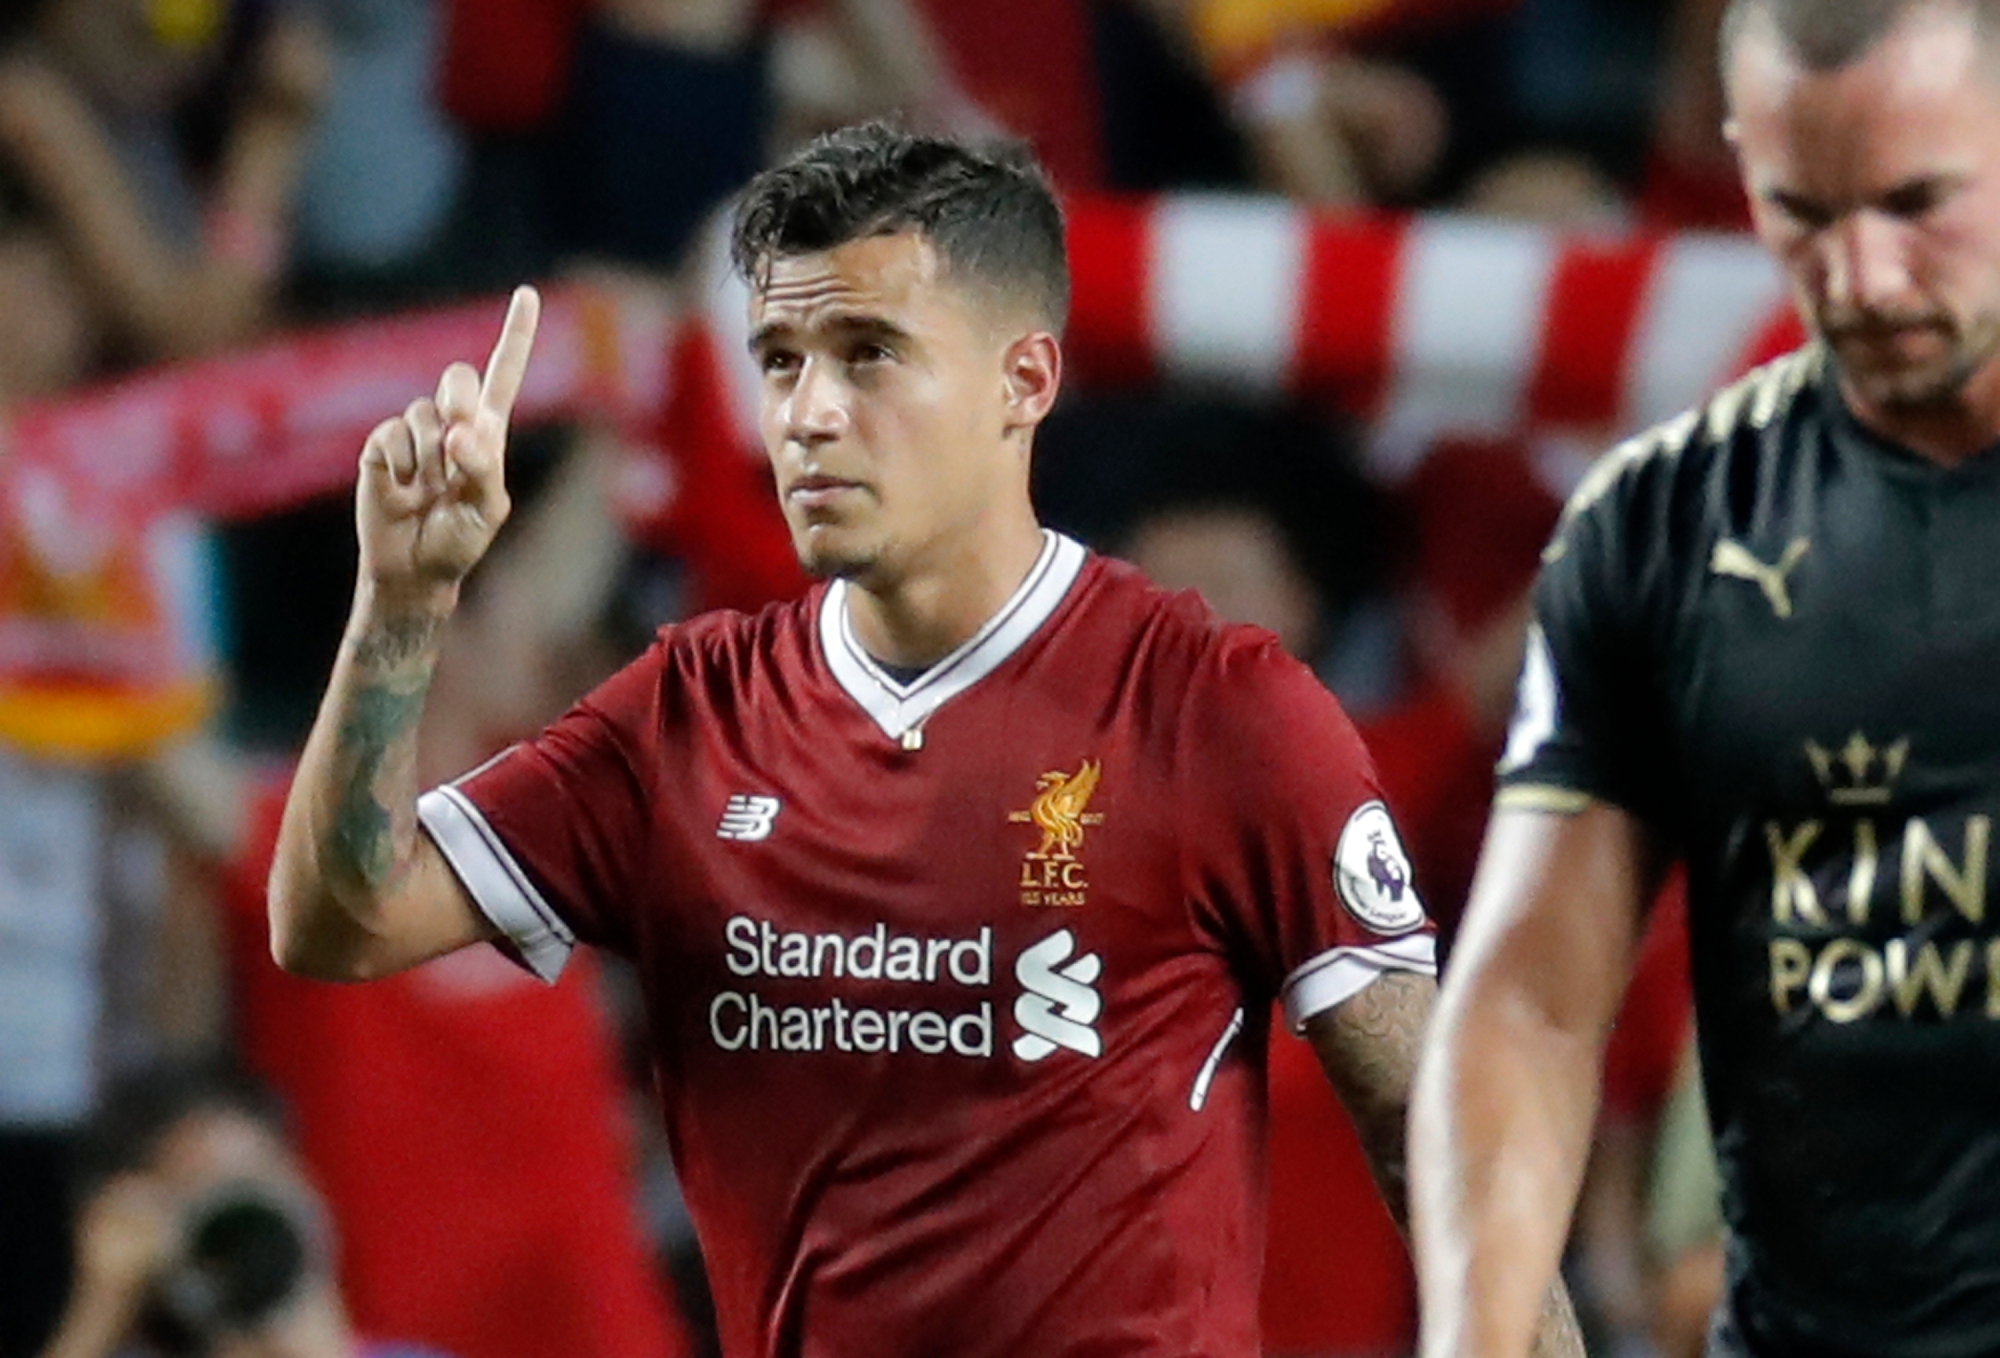 FILE - A Saturday, July 22, 2017, file photo of Liverpool's Philippe Coutinho celebrating after scoring a goal during the final match against Leicester City FC at the Premier League Asia Trophy soccer tournament in Hong Kong. Coutinho is close to sealing a move to Barcelona from Liverpool. A person familiar with the deal tells The Associated Press that Liverpool and Barcelona have reached an agreement that will see the Brazil midfielder move to the Spanish team for a fee of 160 million euros ($192 million). Coutinho was traveling to Spain on Saturday, Jan. 6, 2018 and an announcement was expected on Sunday. (AP Photo/Kin Cheung, File) Soccer Barcelona Coutinho